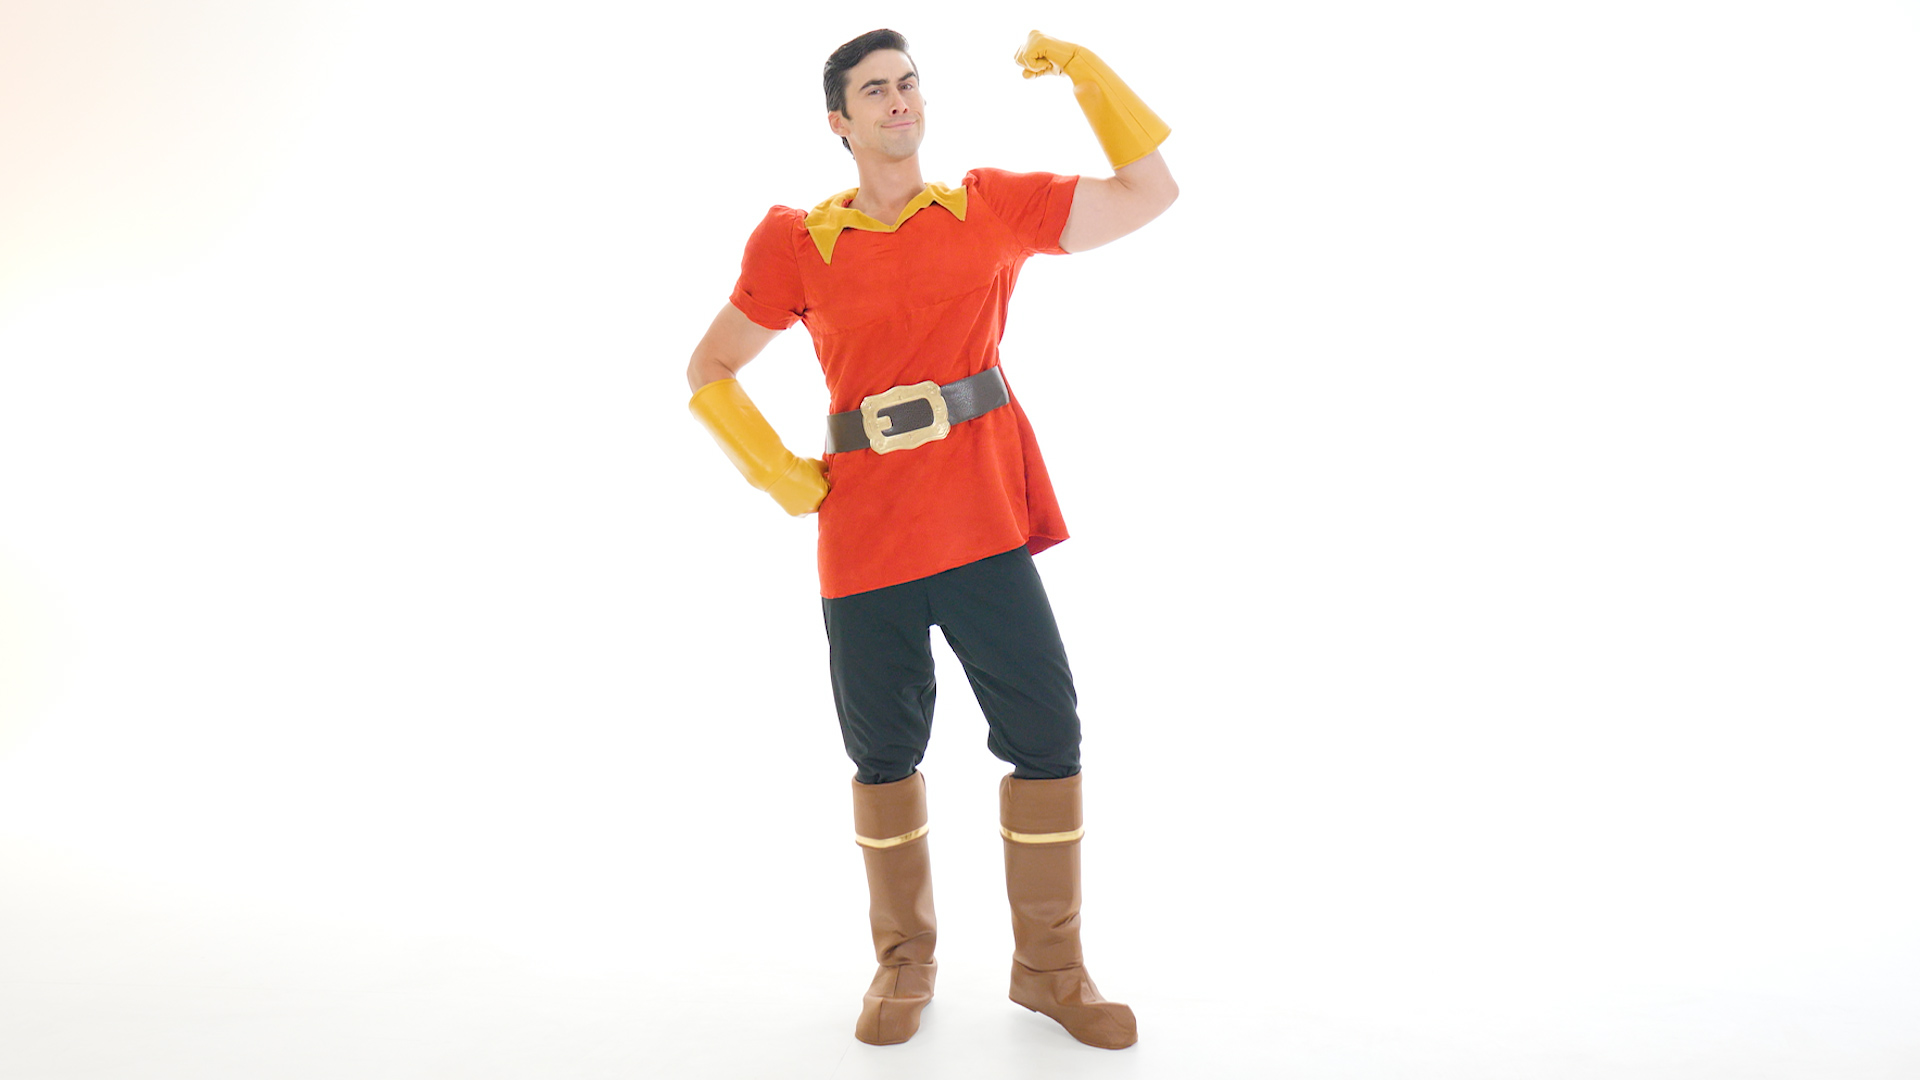 Become the brawny, handsome bachelor of everyone's dreams when you put on this licensed exclusive Disney Beauty and the Beast Gaston Men's Costume.